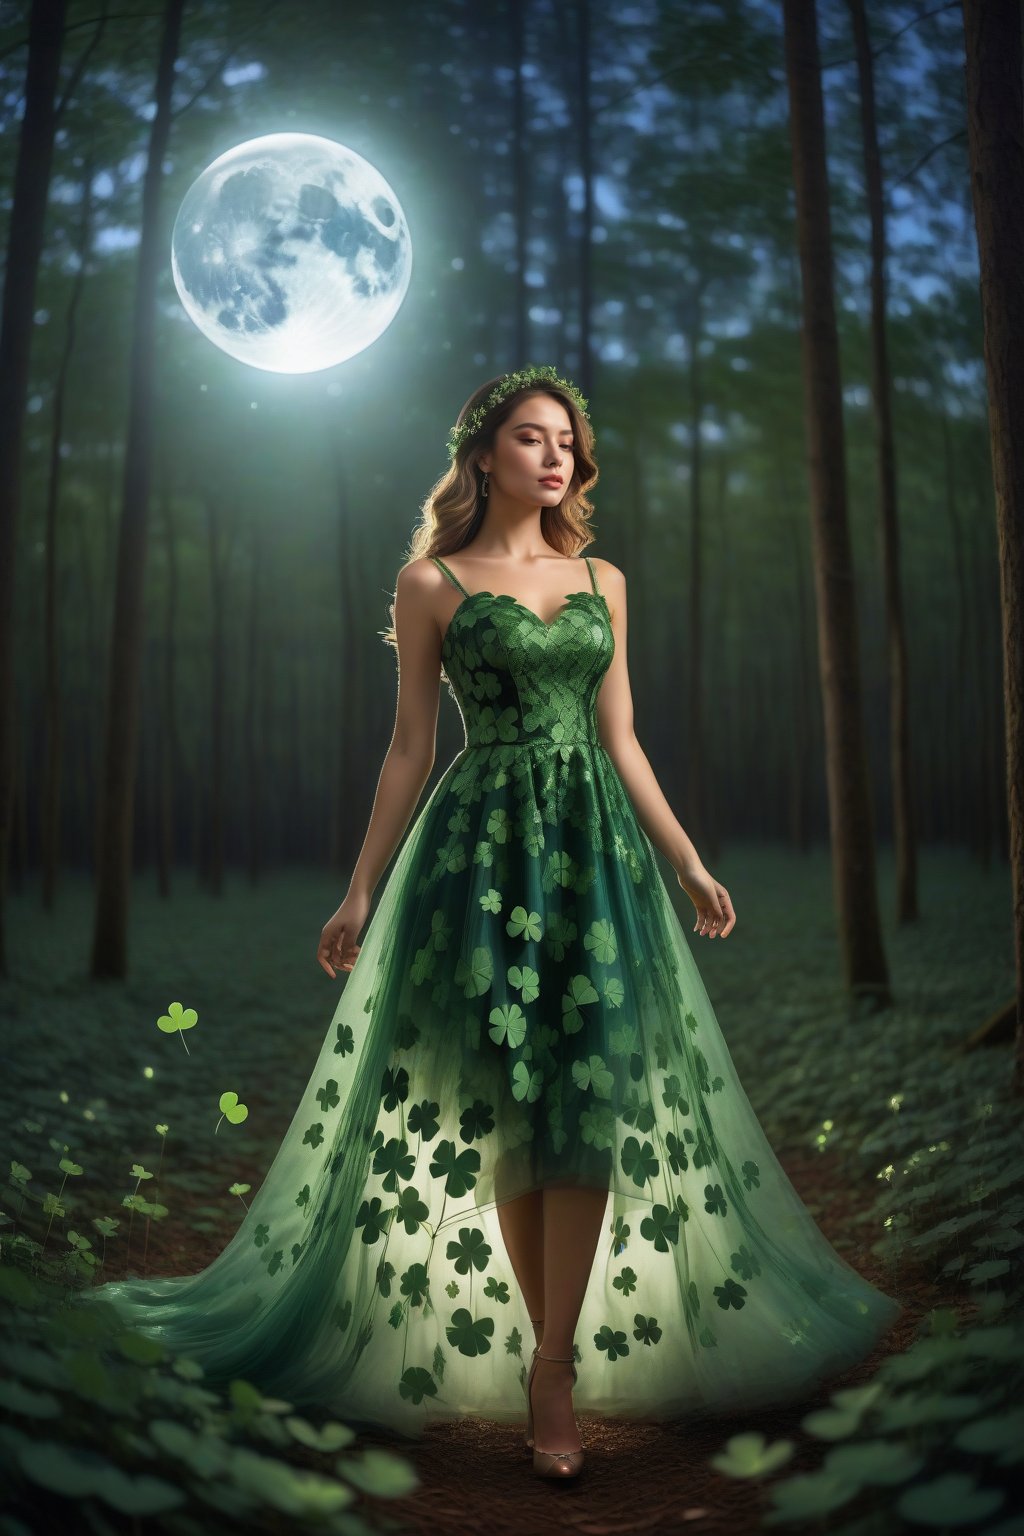 A beautiful girl wearing a four-leaf clover dress, standing in a beautiful forest, with the bright moonlight shining on the earth under the night sky